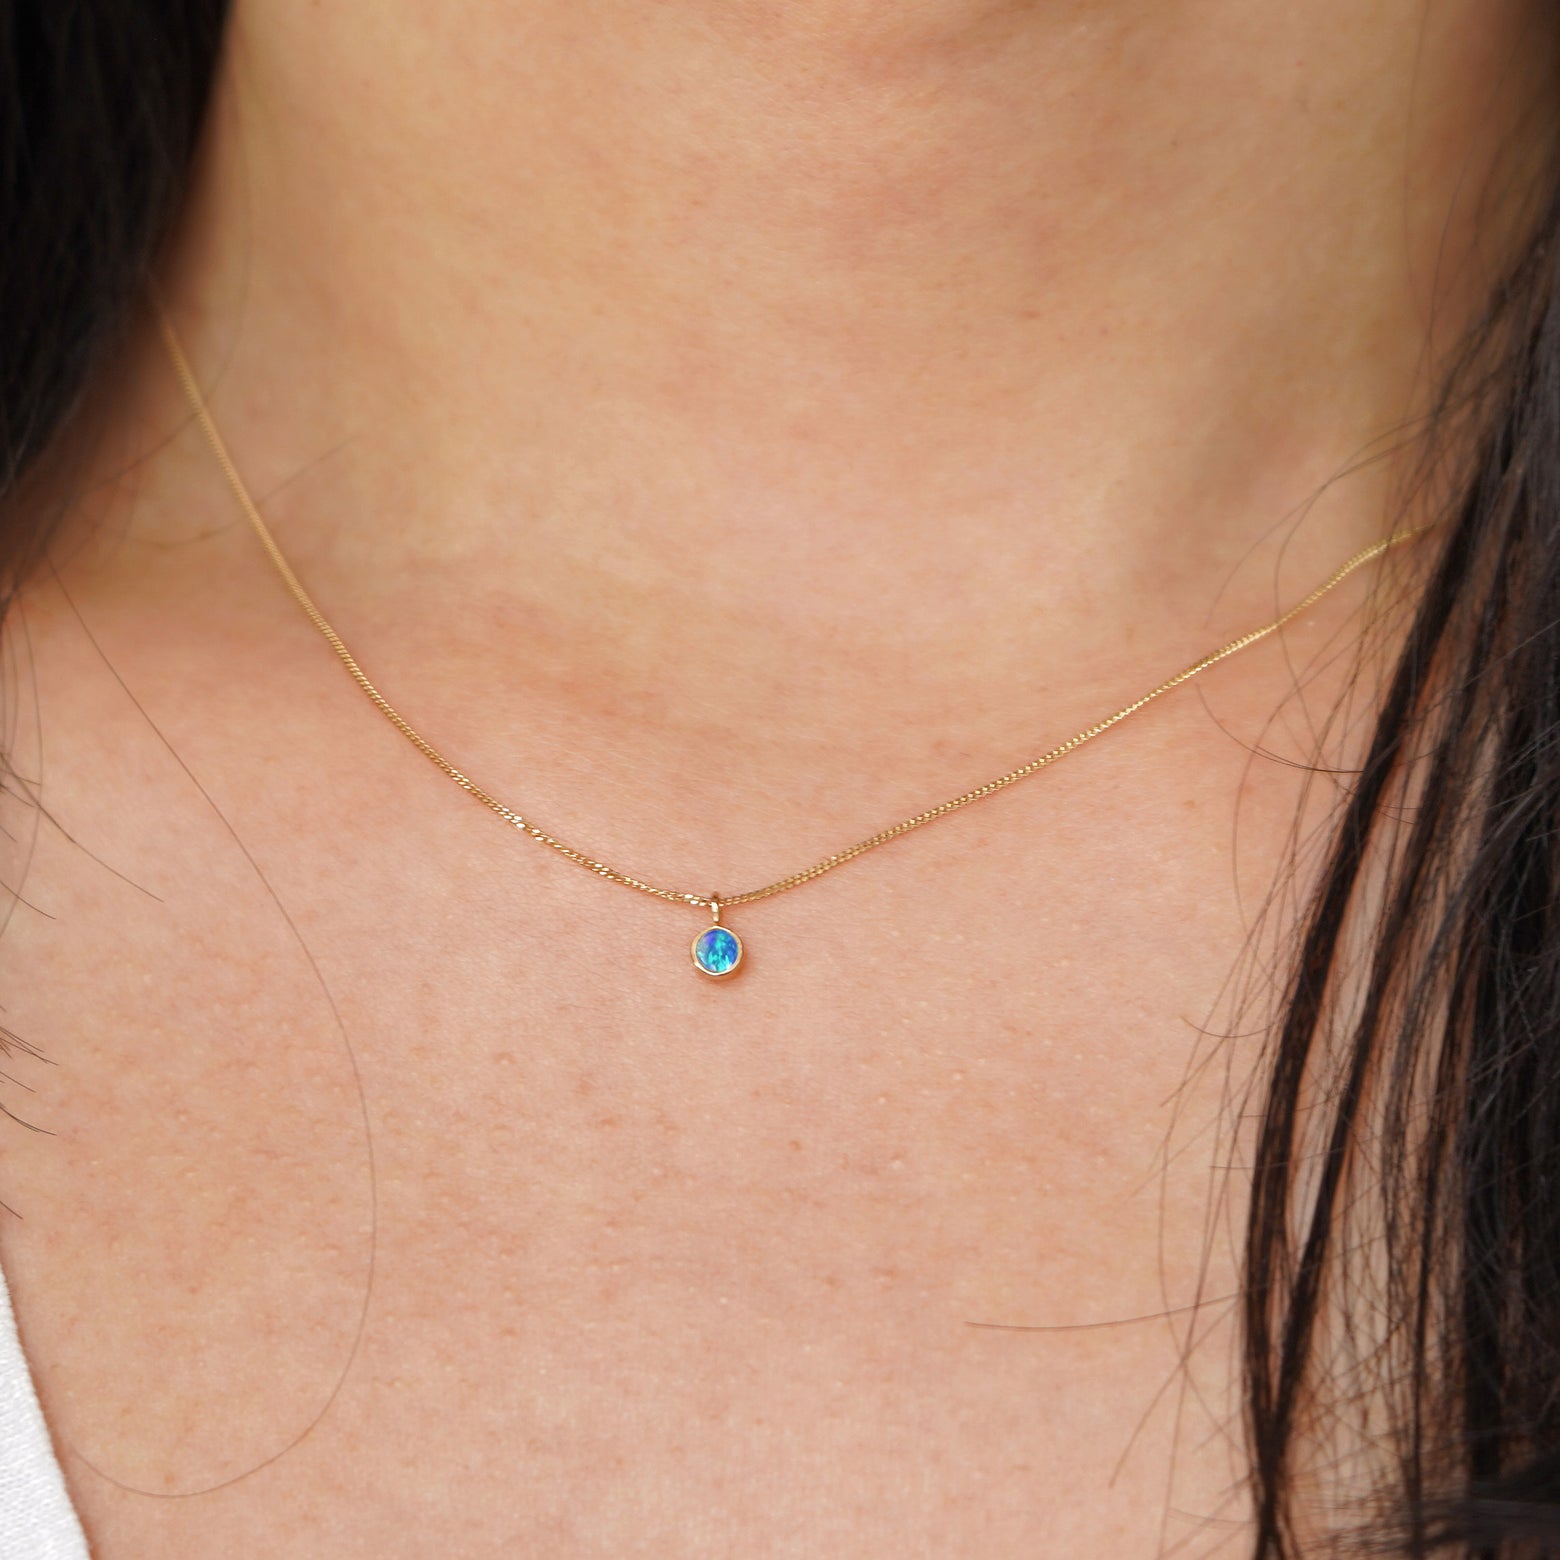 Close up view of a model's neck wearing a solid 14 karat gold Opal necklace